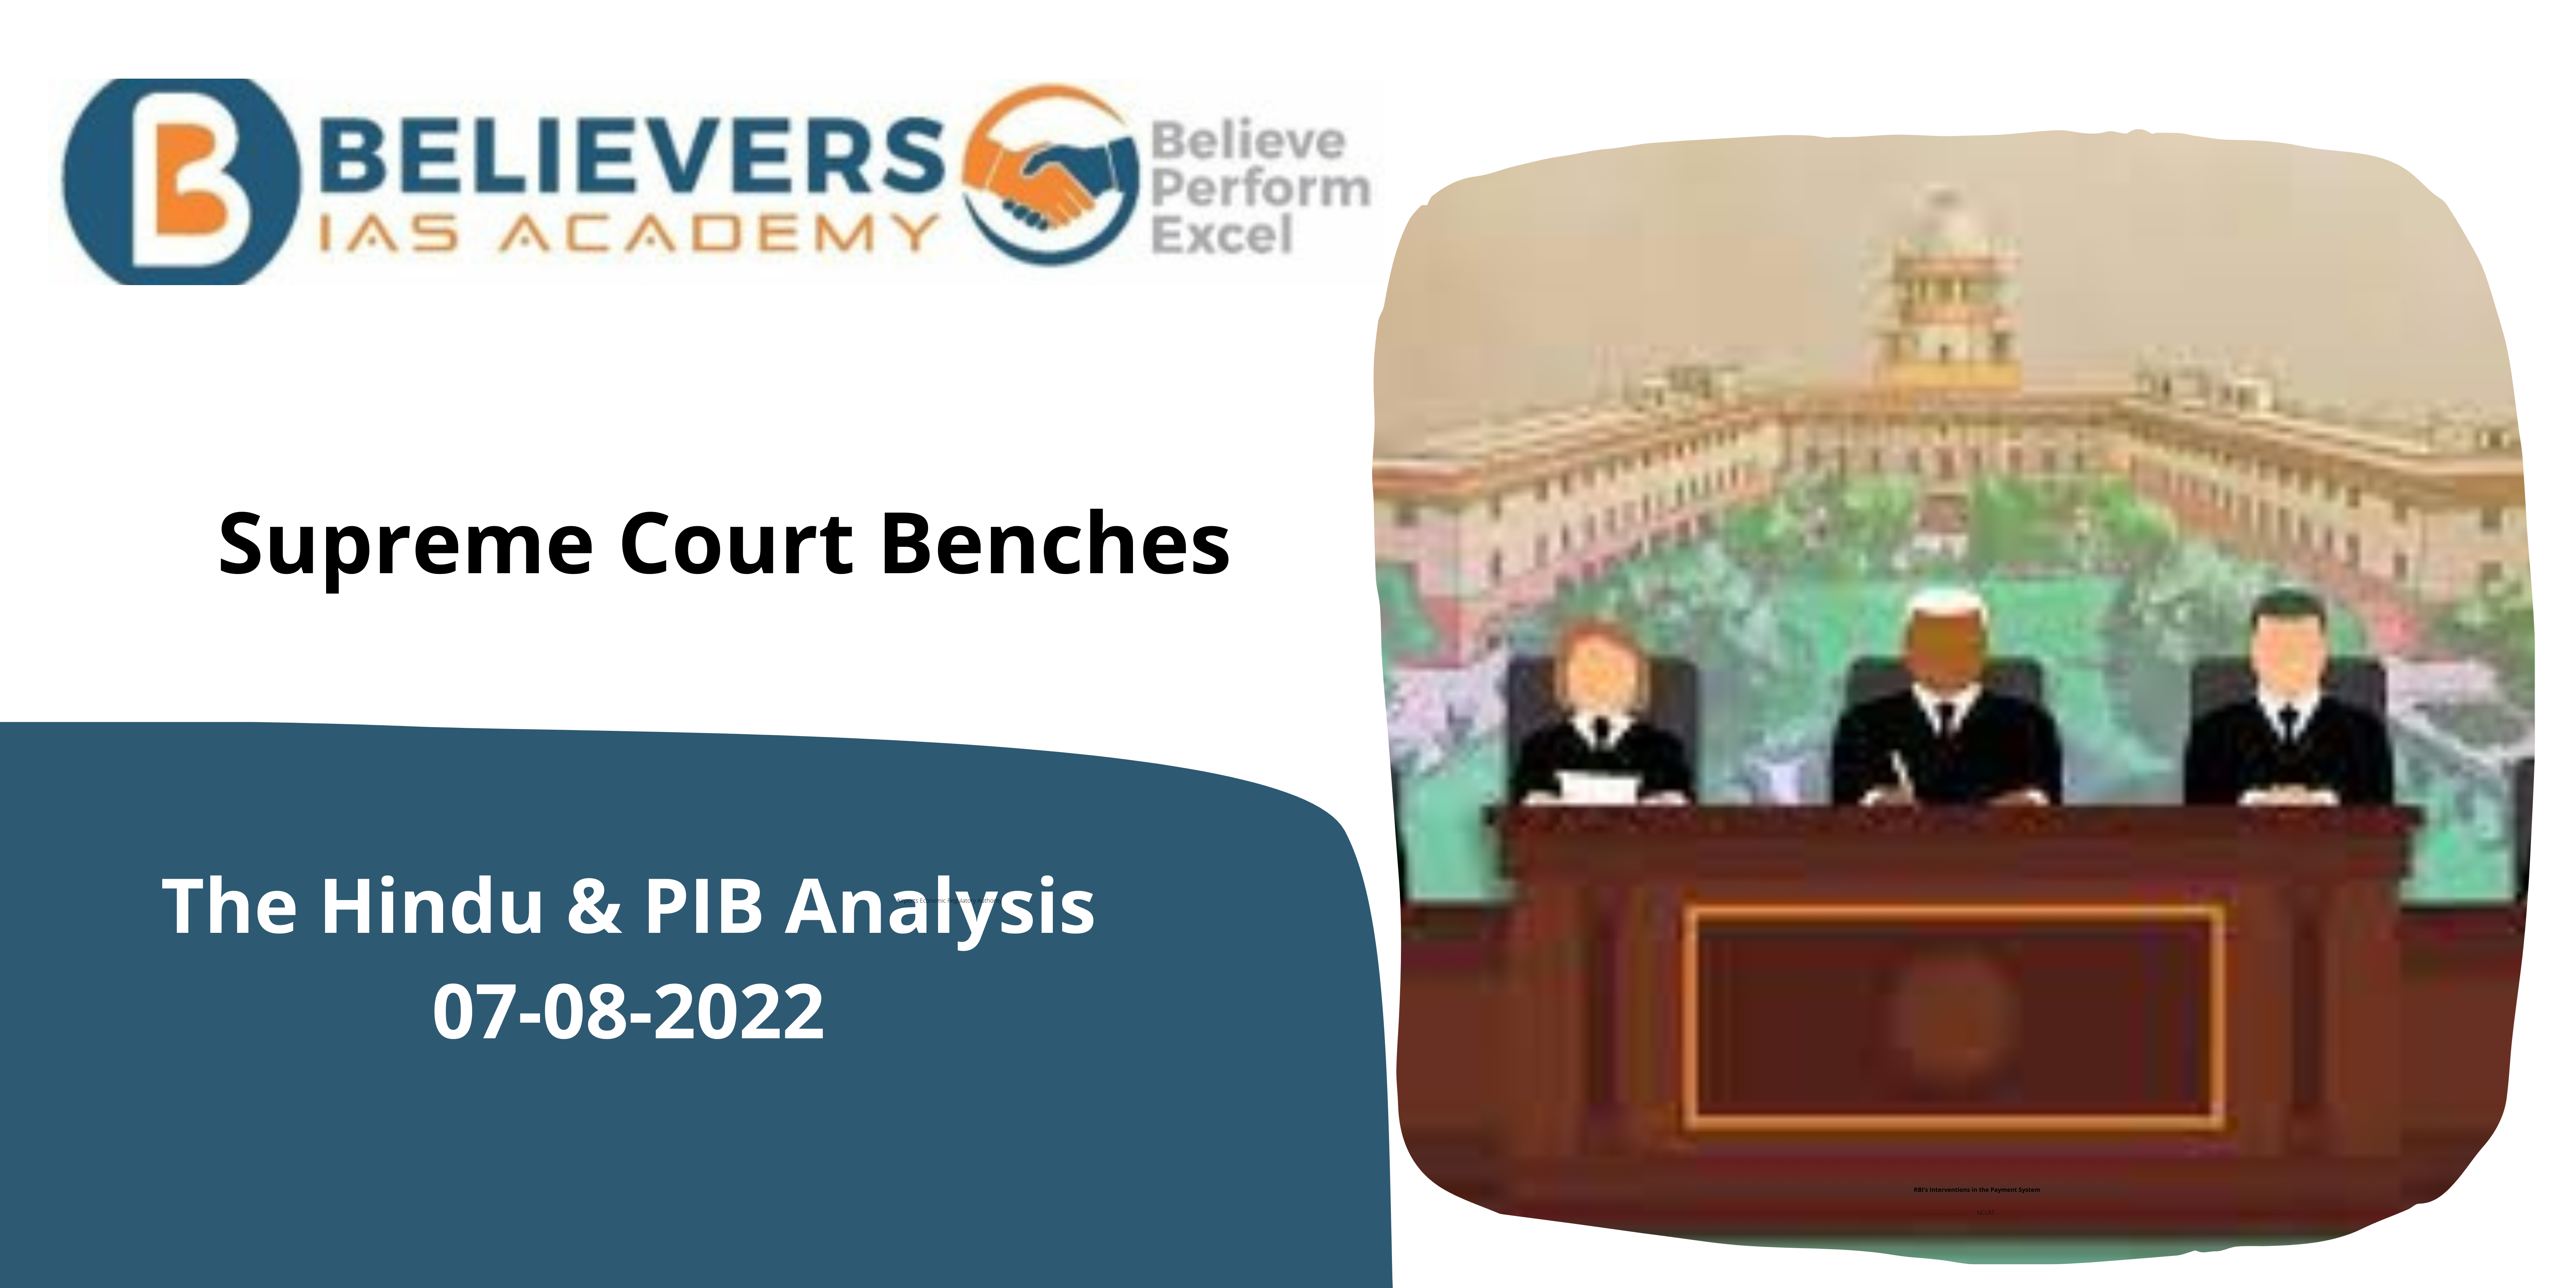 UPSC current affairs - Supreme court benches